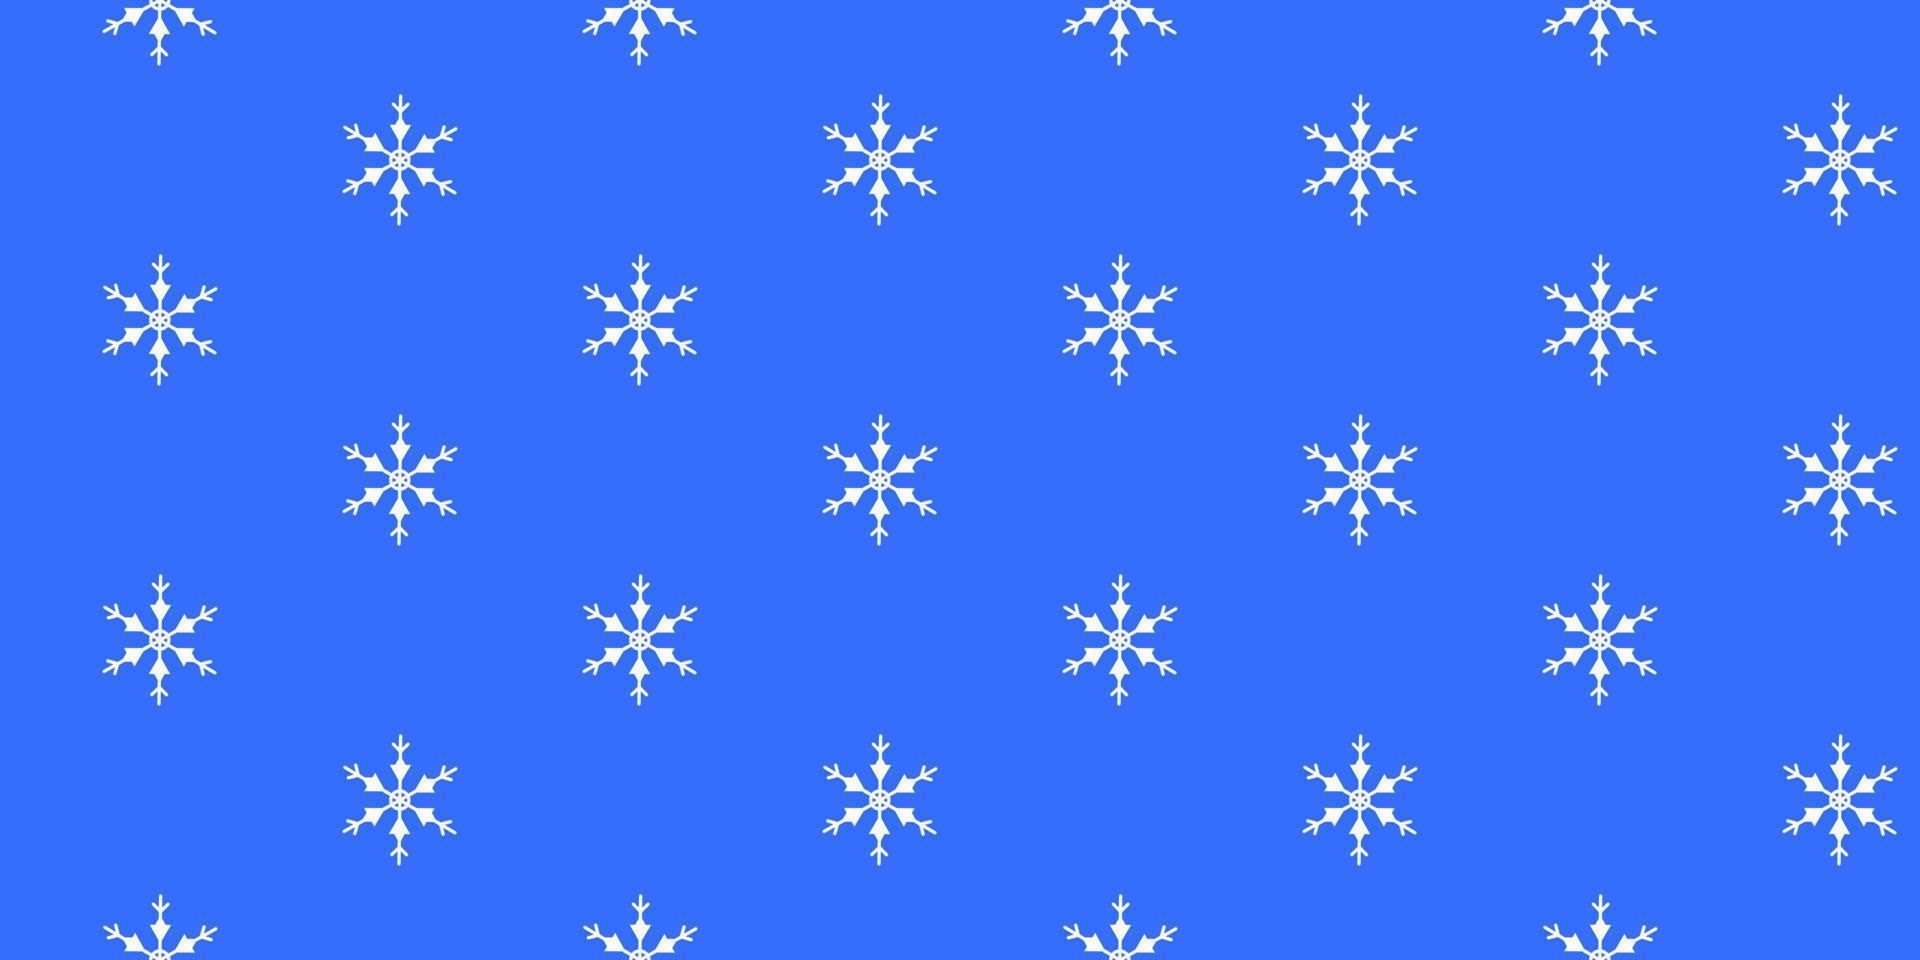 Seamless winter background with white snowflakes on a blue background. vector illustration